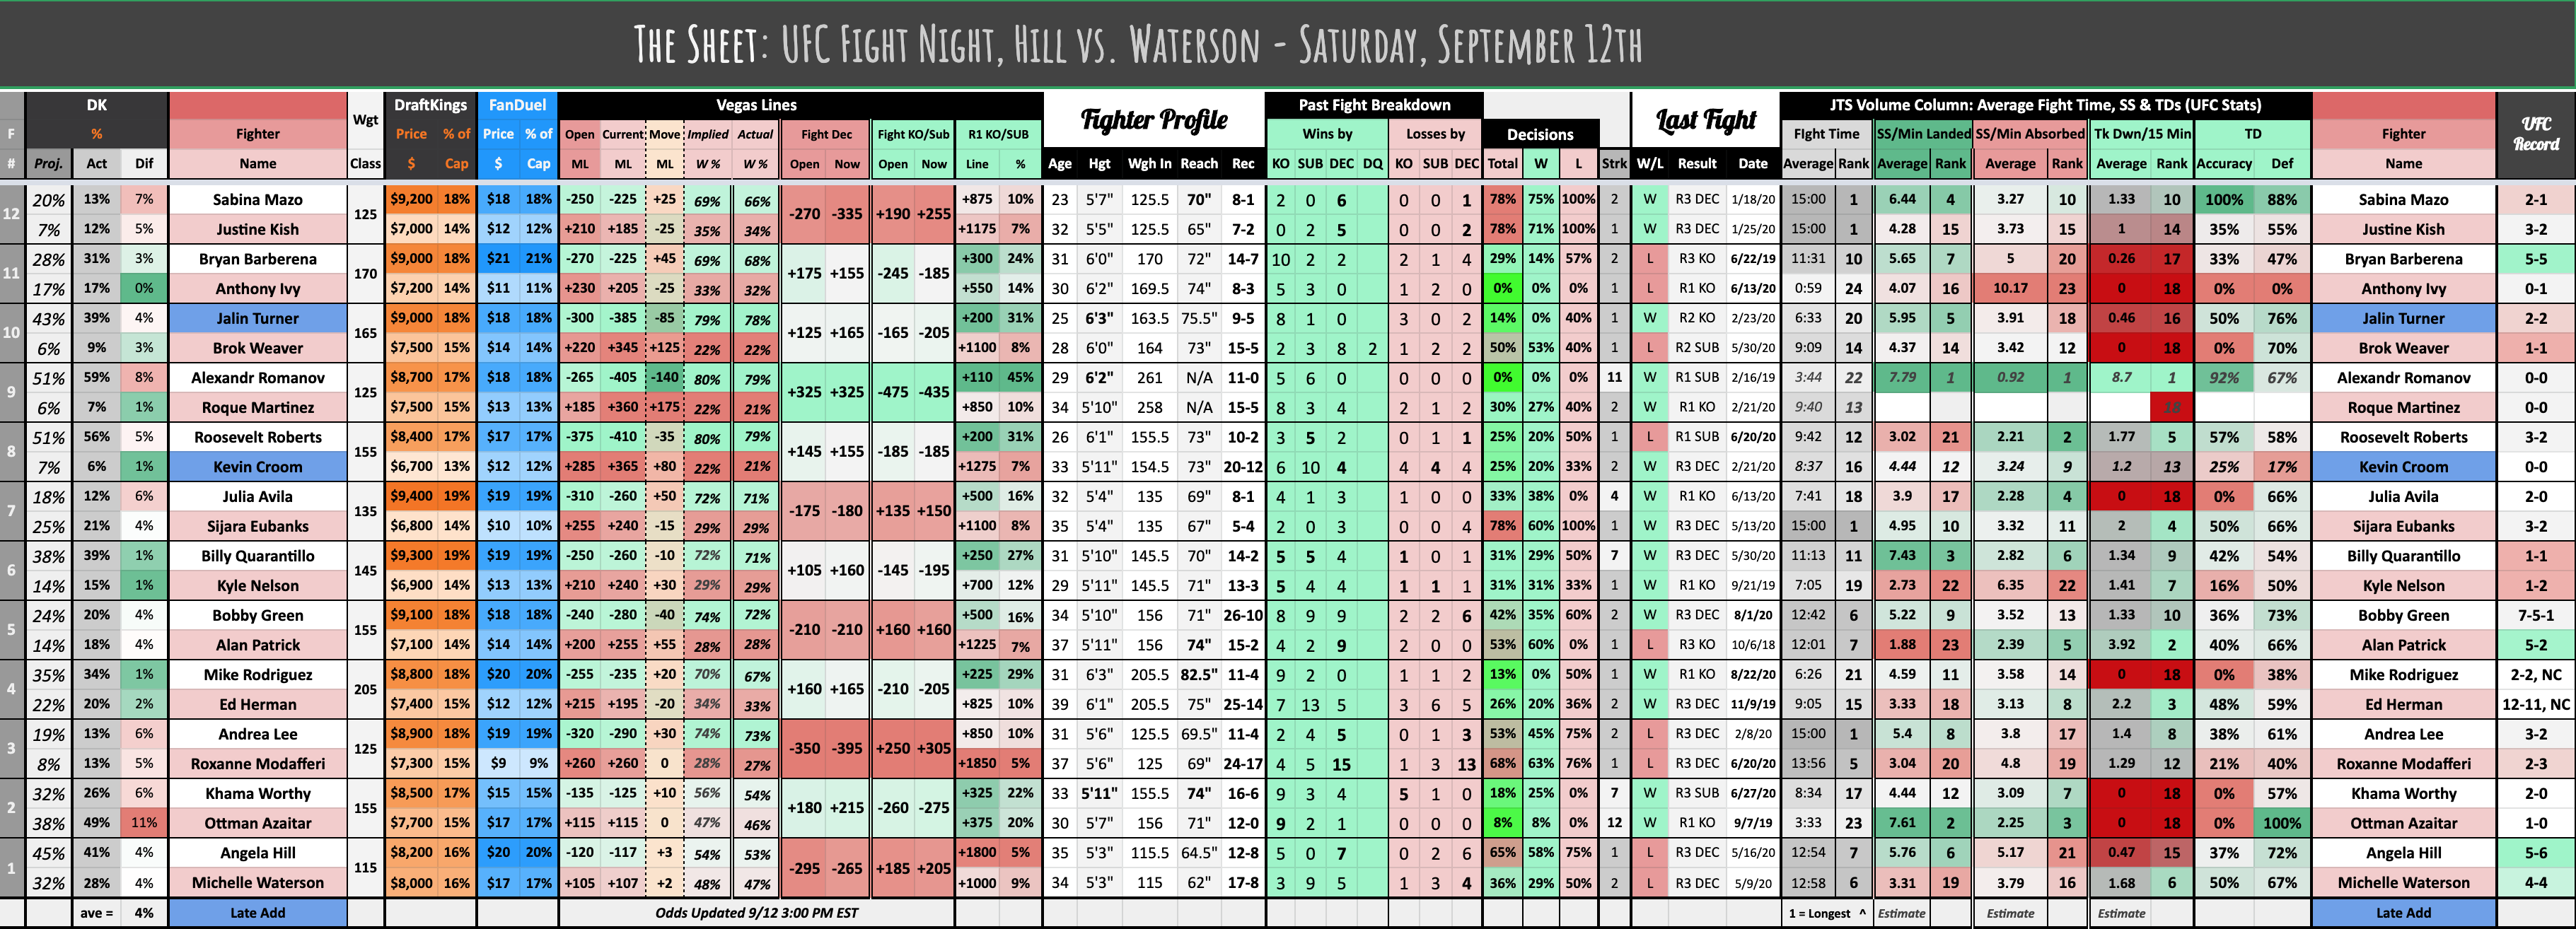 The Sheet: UFC Fight Night, Hill vs. Waterson - Saturday, September 12th